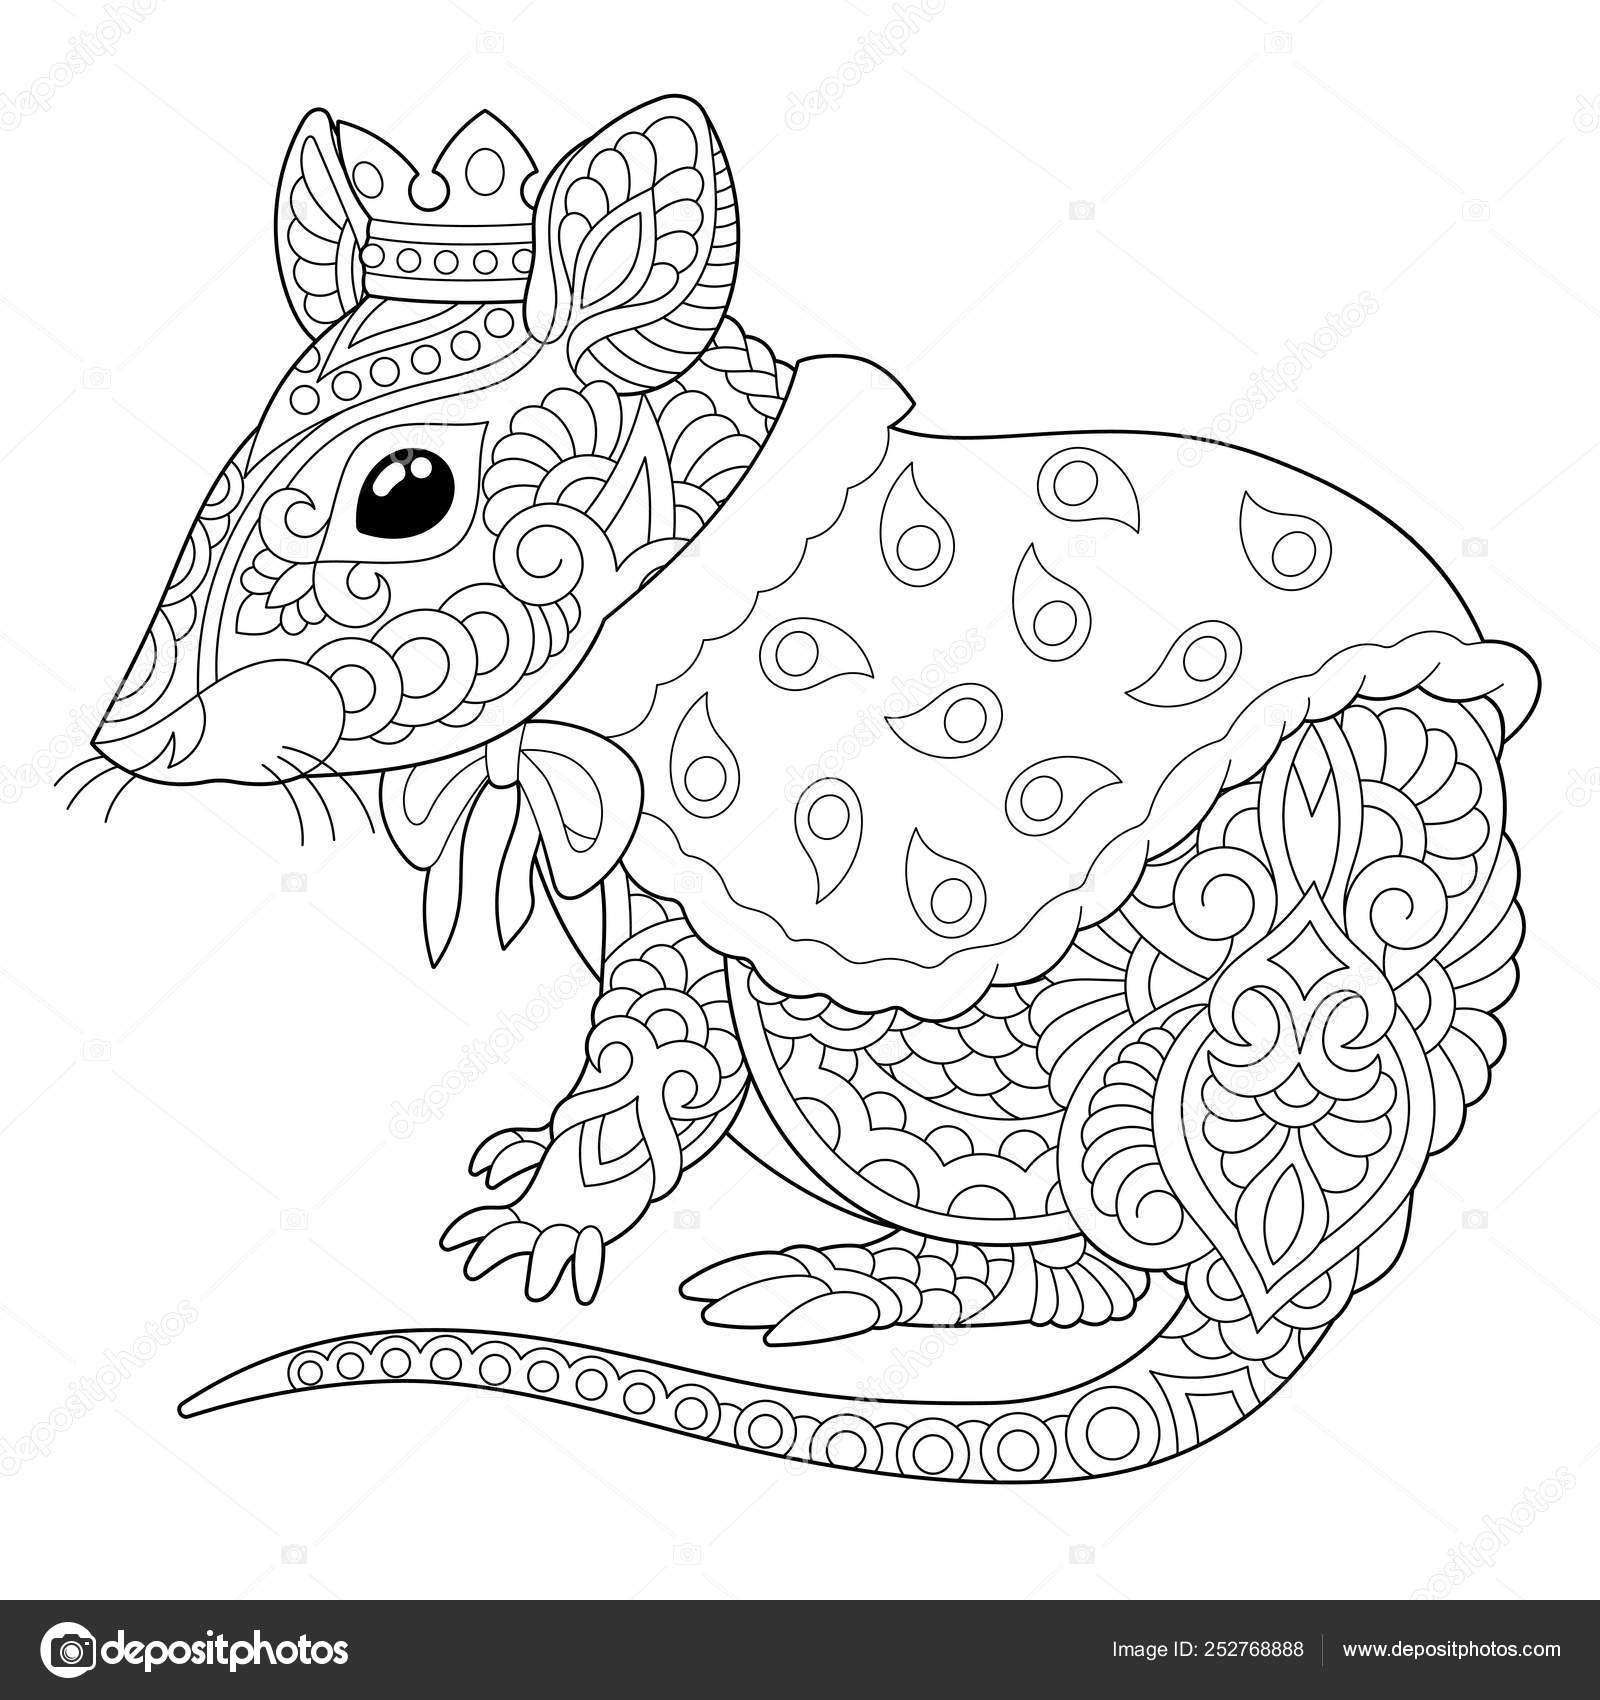 Zentangle mouse rat coloring page stock vector by sybirko